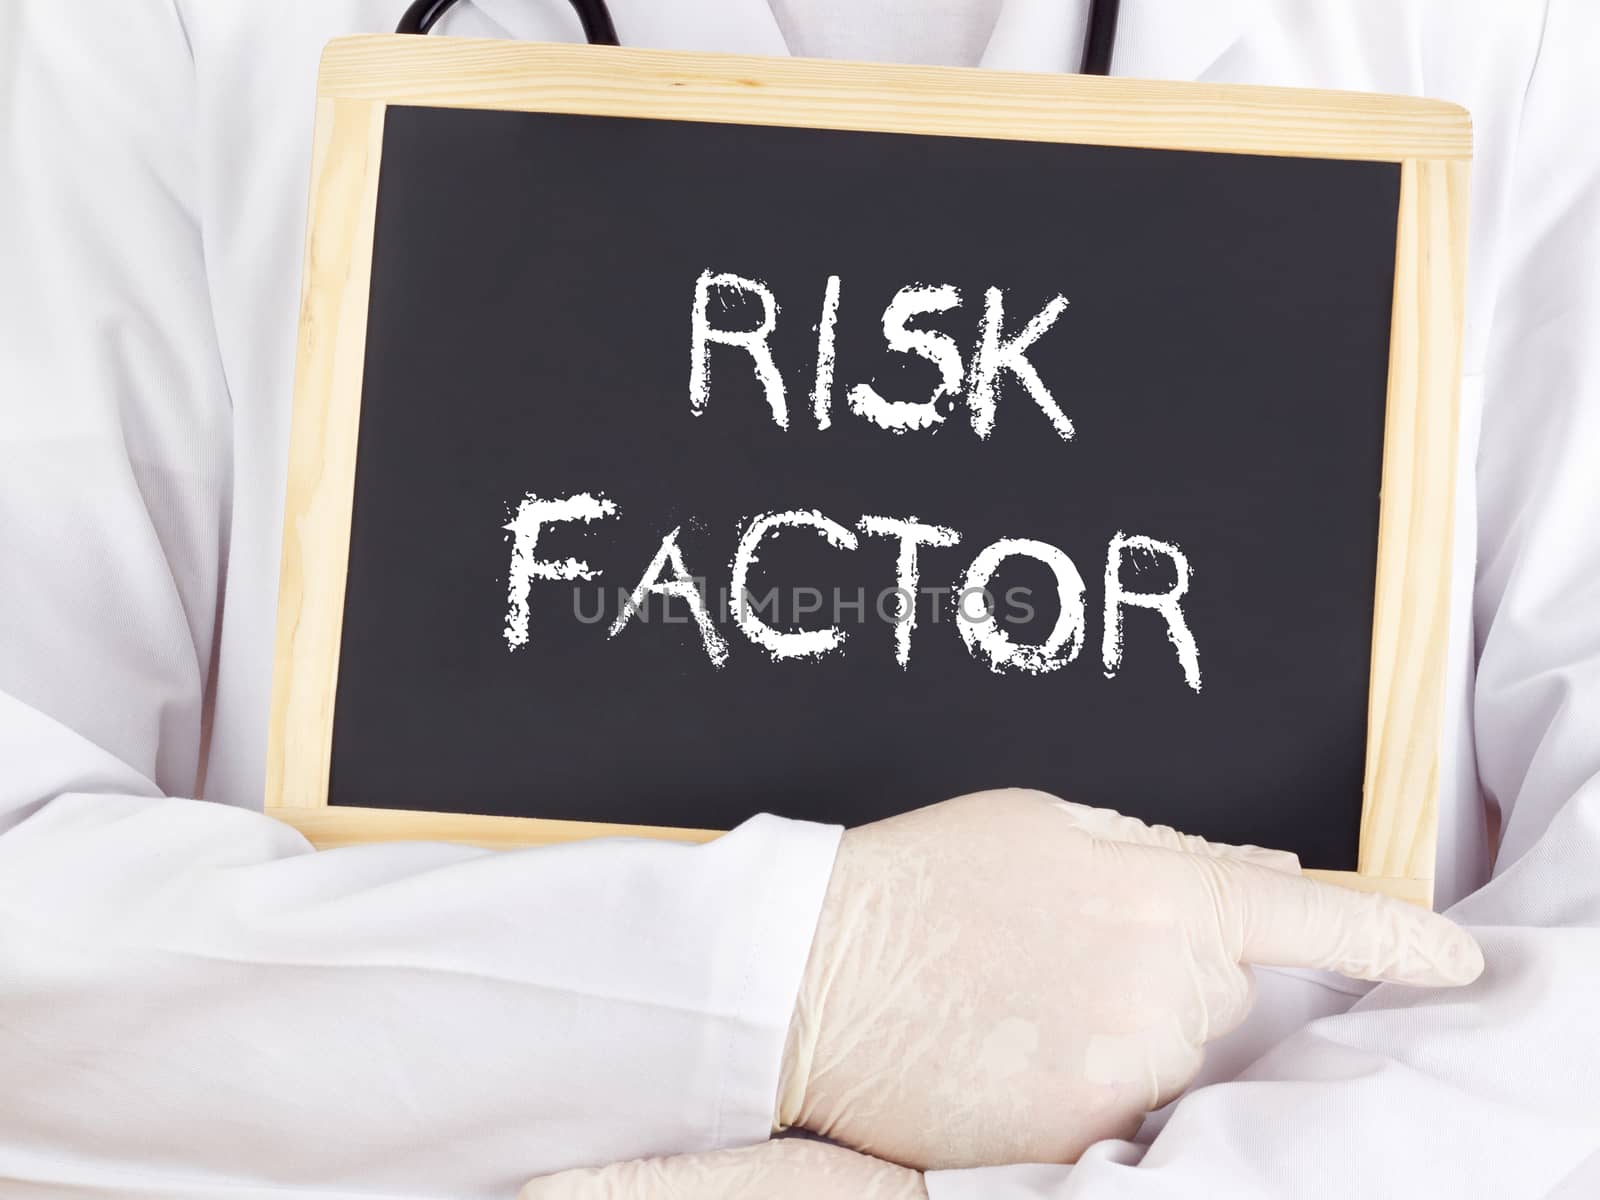 Doctor shows information on blackboard: risk factor by gwolters